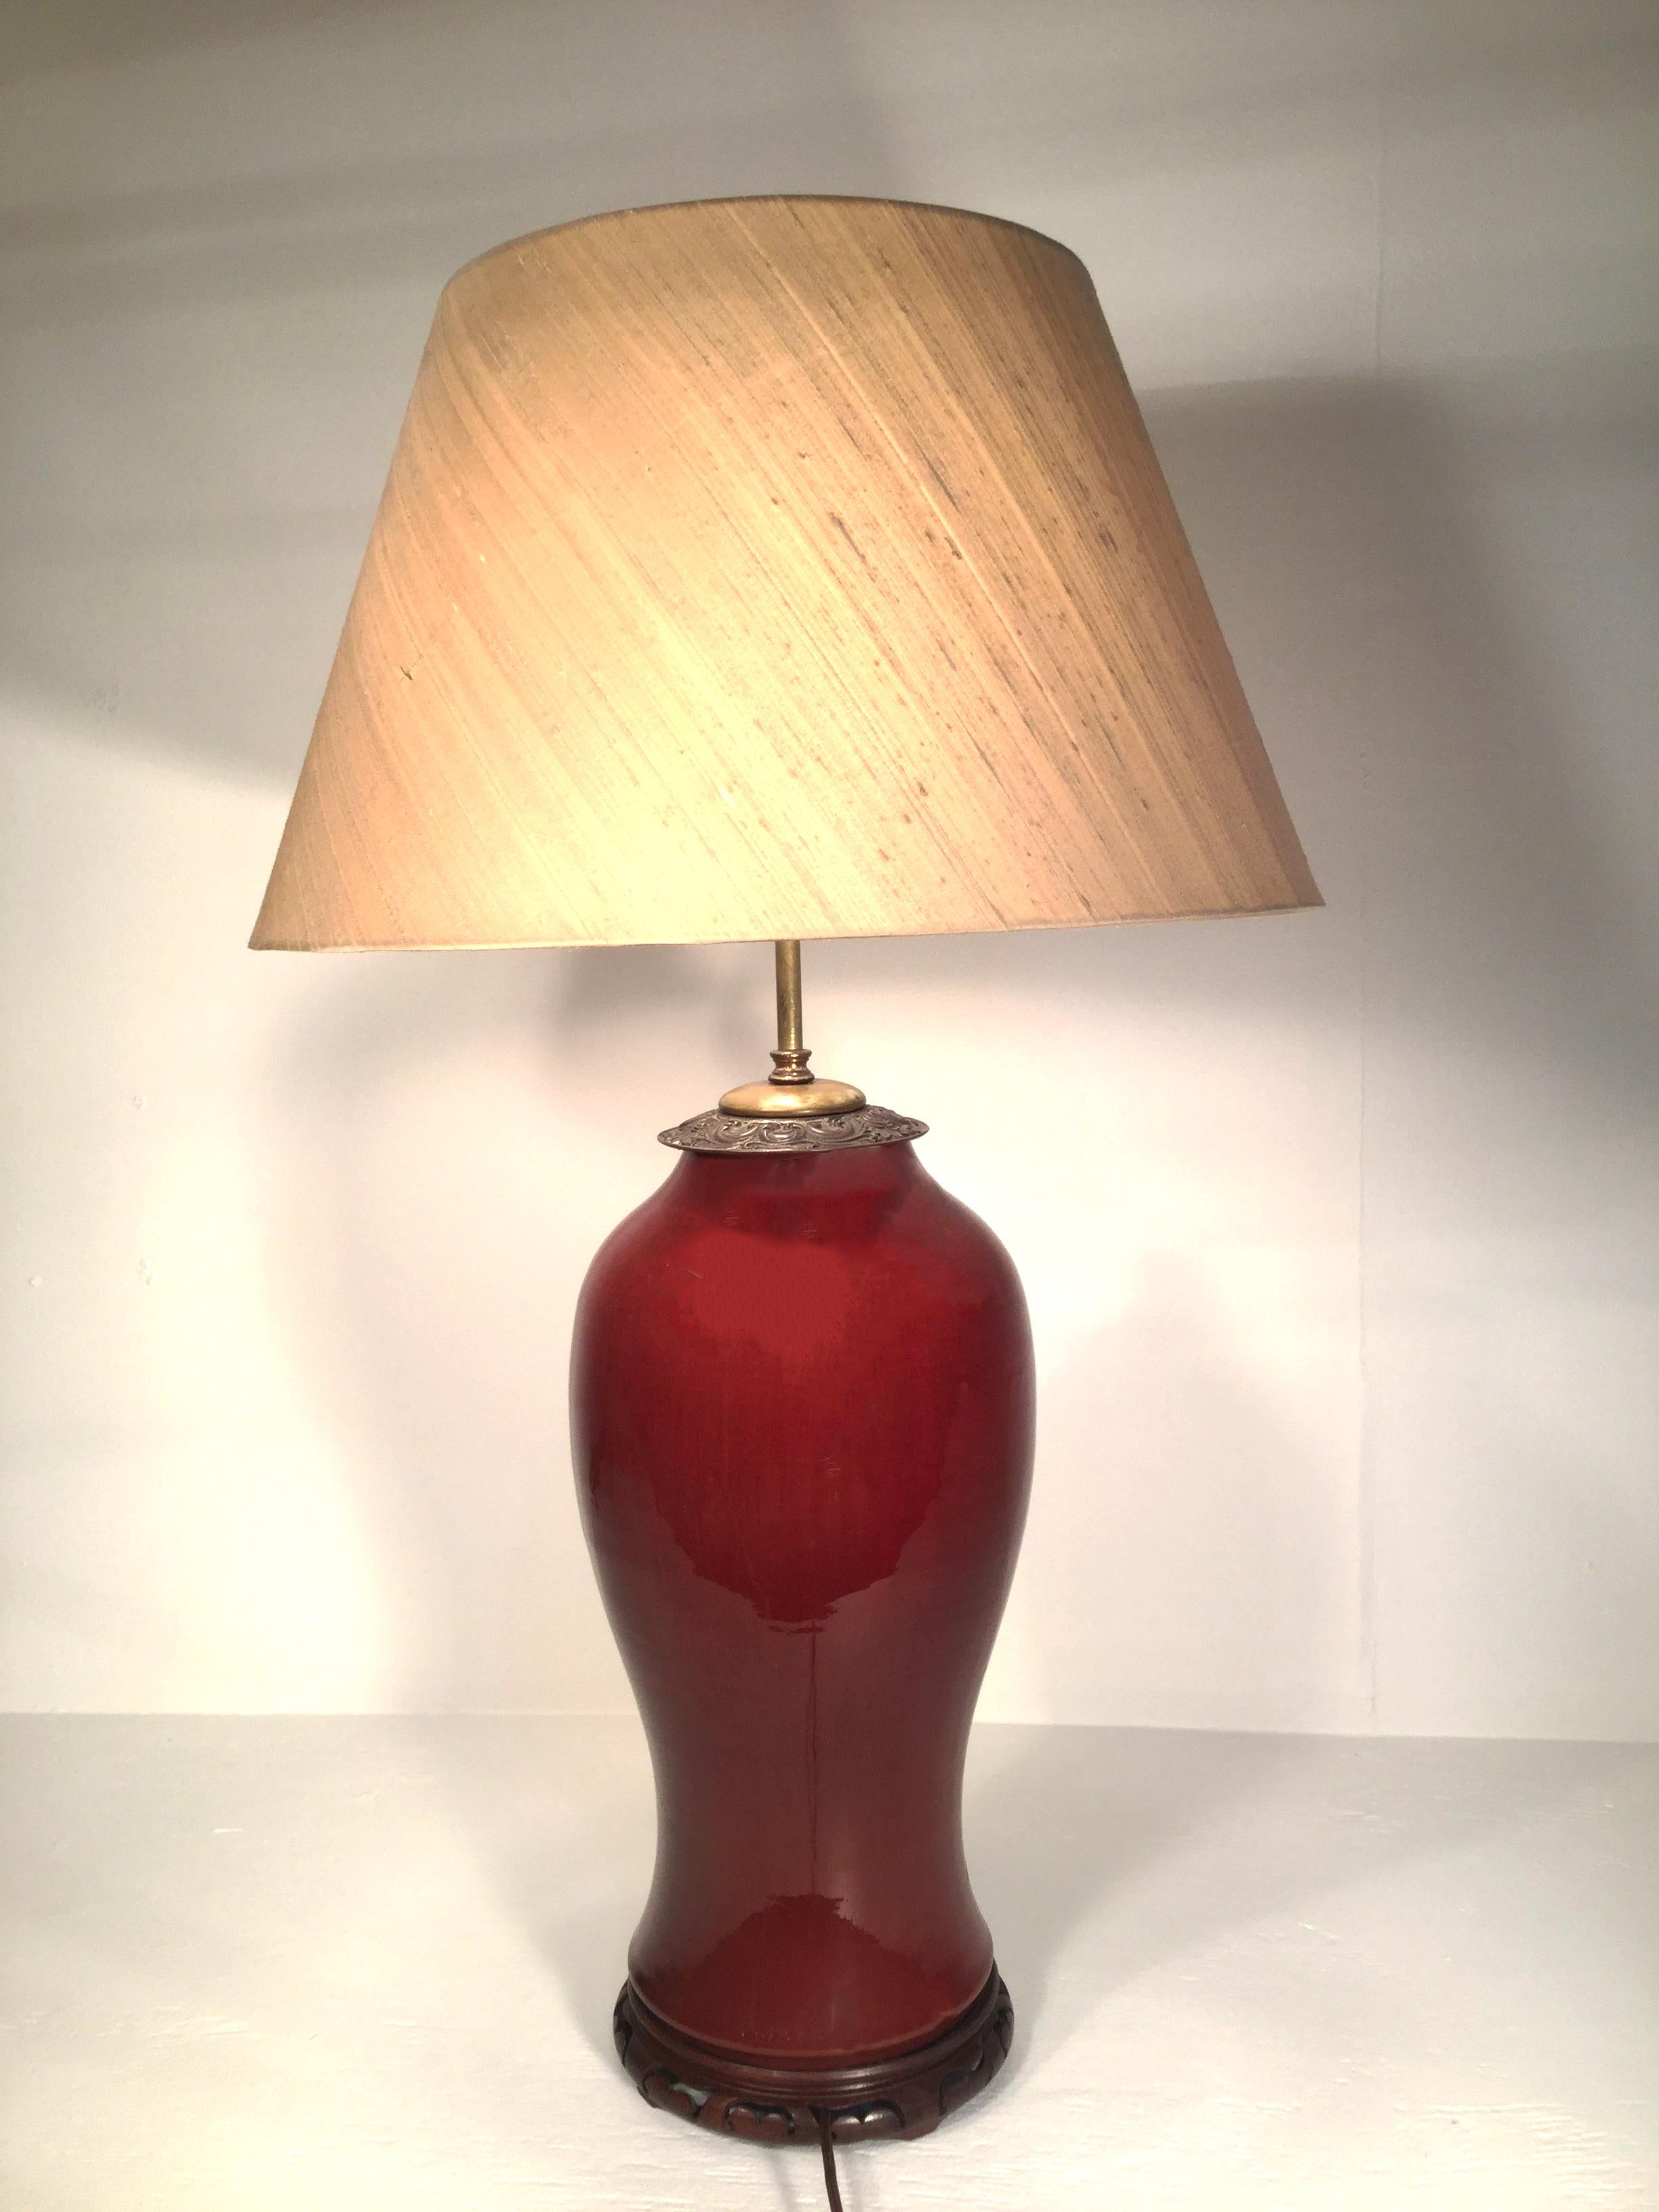 This beautiful 19th century Sang De Boeuf urn was mounted and transformed into a lamp during the early 20th century. The grand scale and oxblood color of this table lamp make it wonderful for any room. It is mounted on a teek carved base with bronze